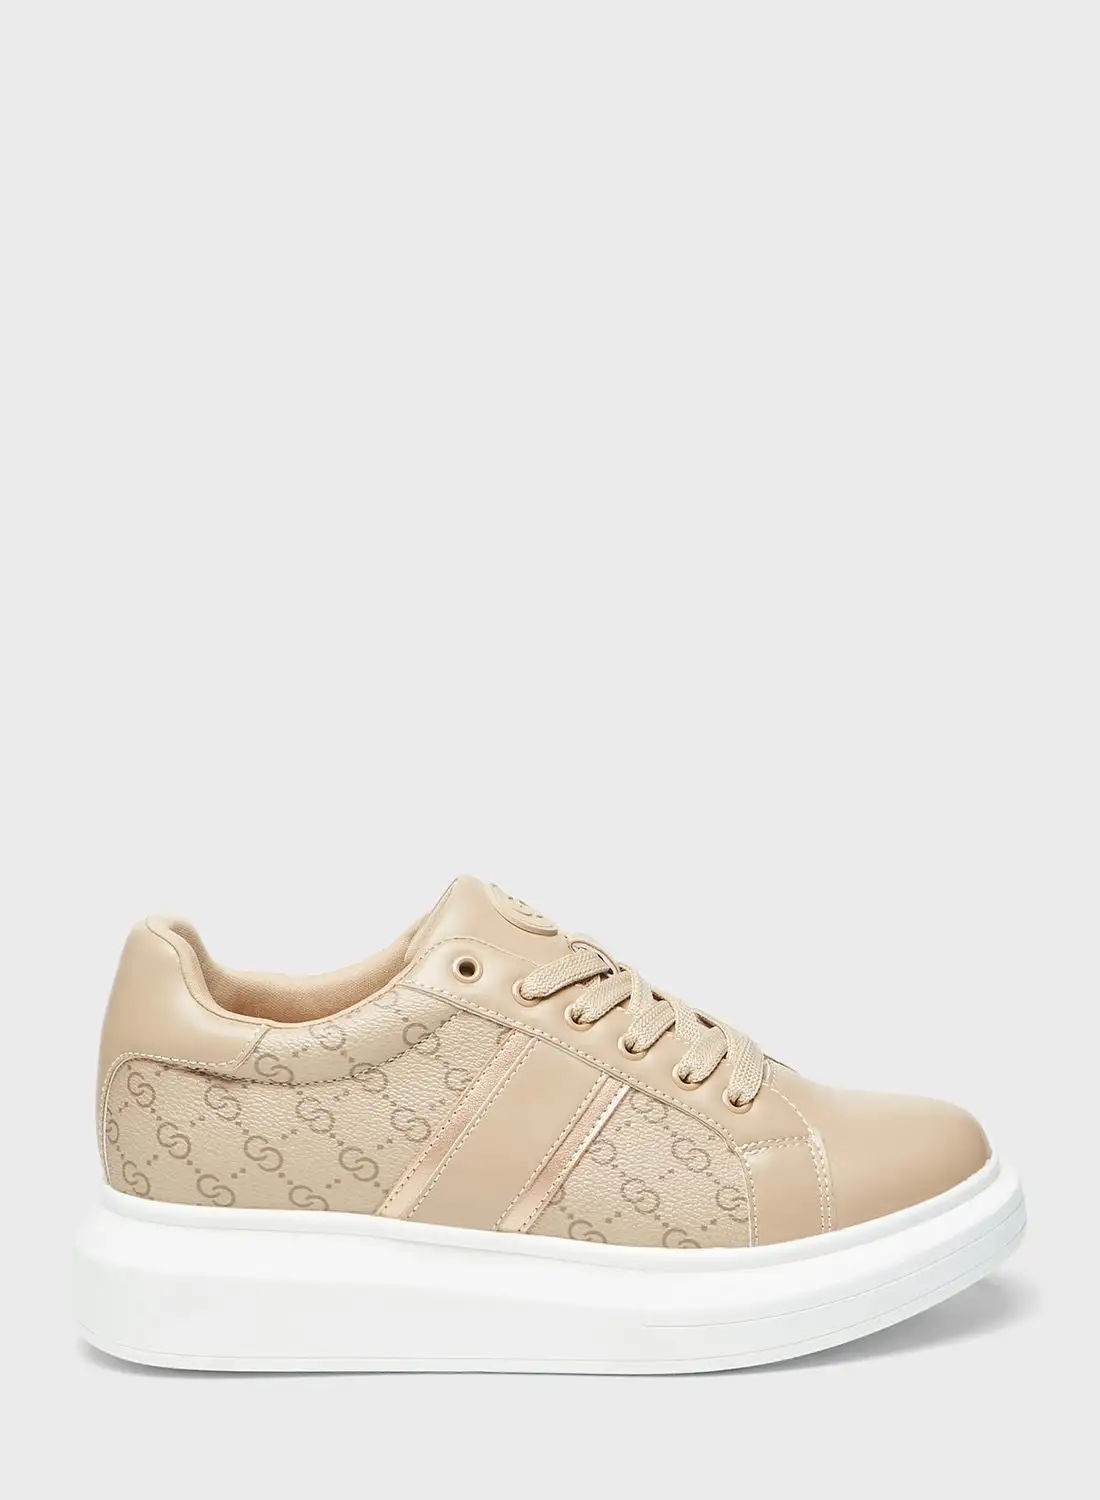 Celeste Lace Up Low Top Sneakers